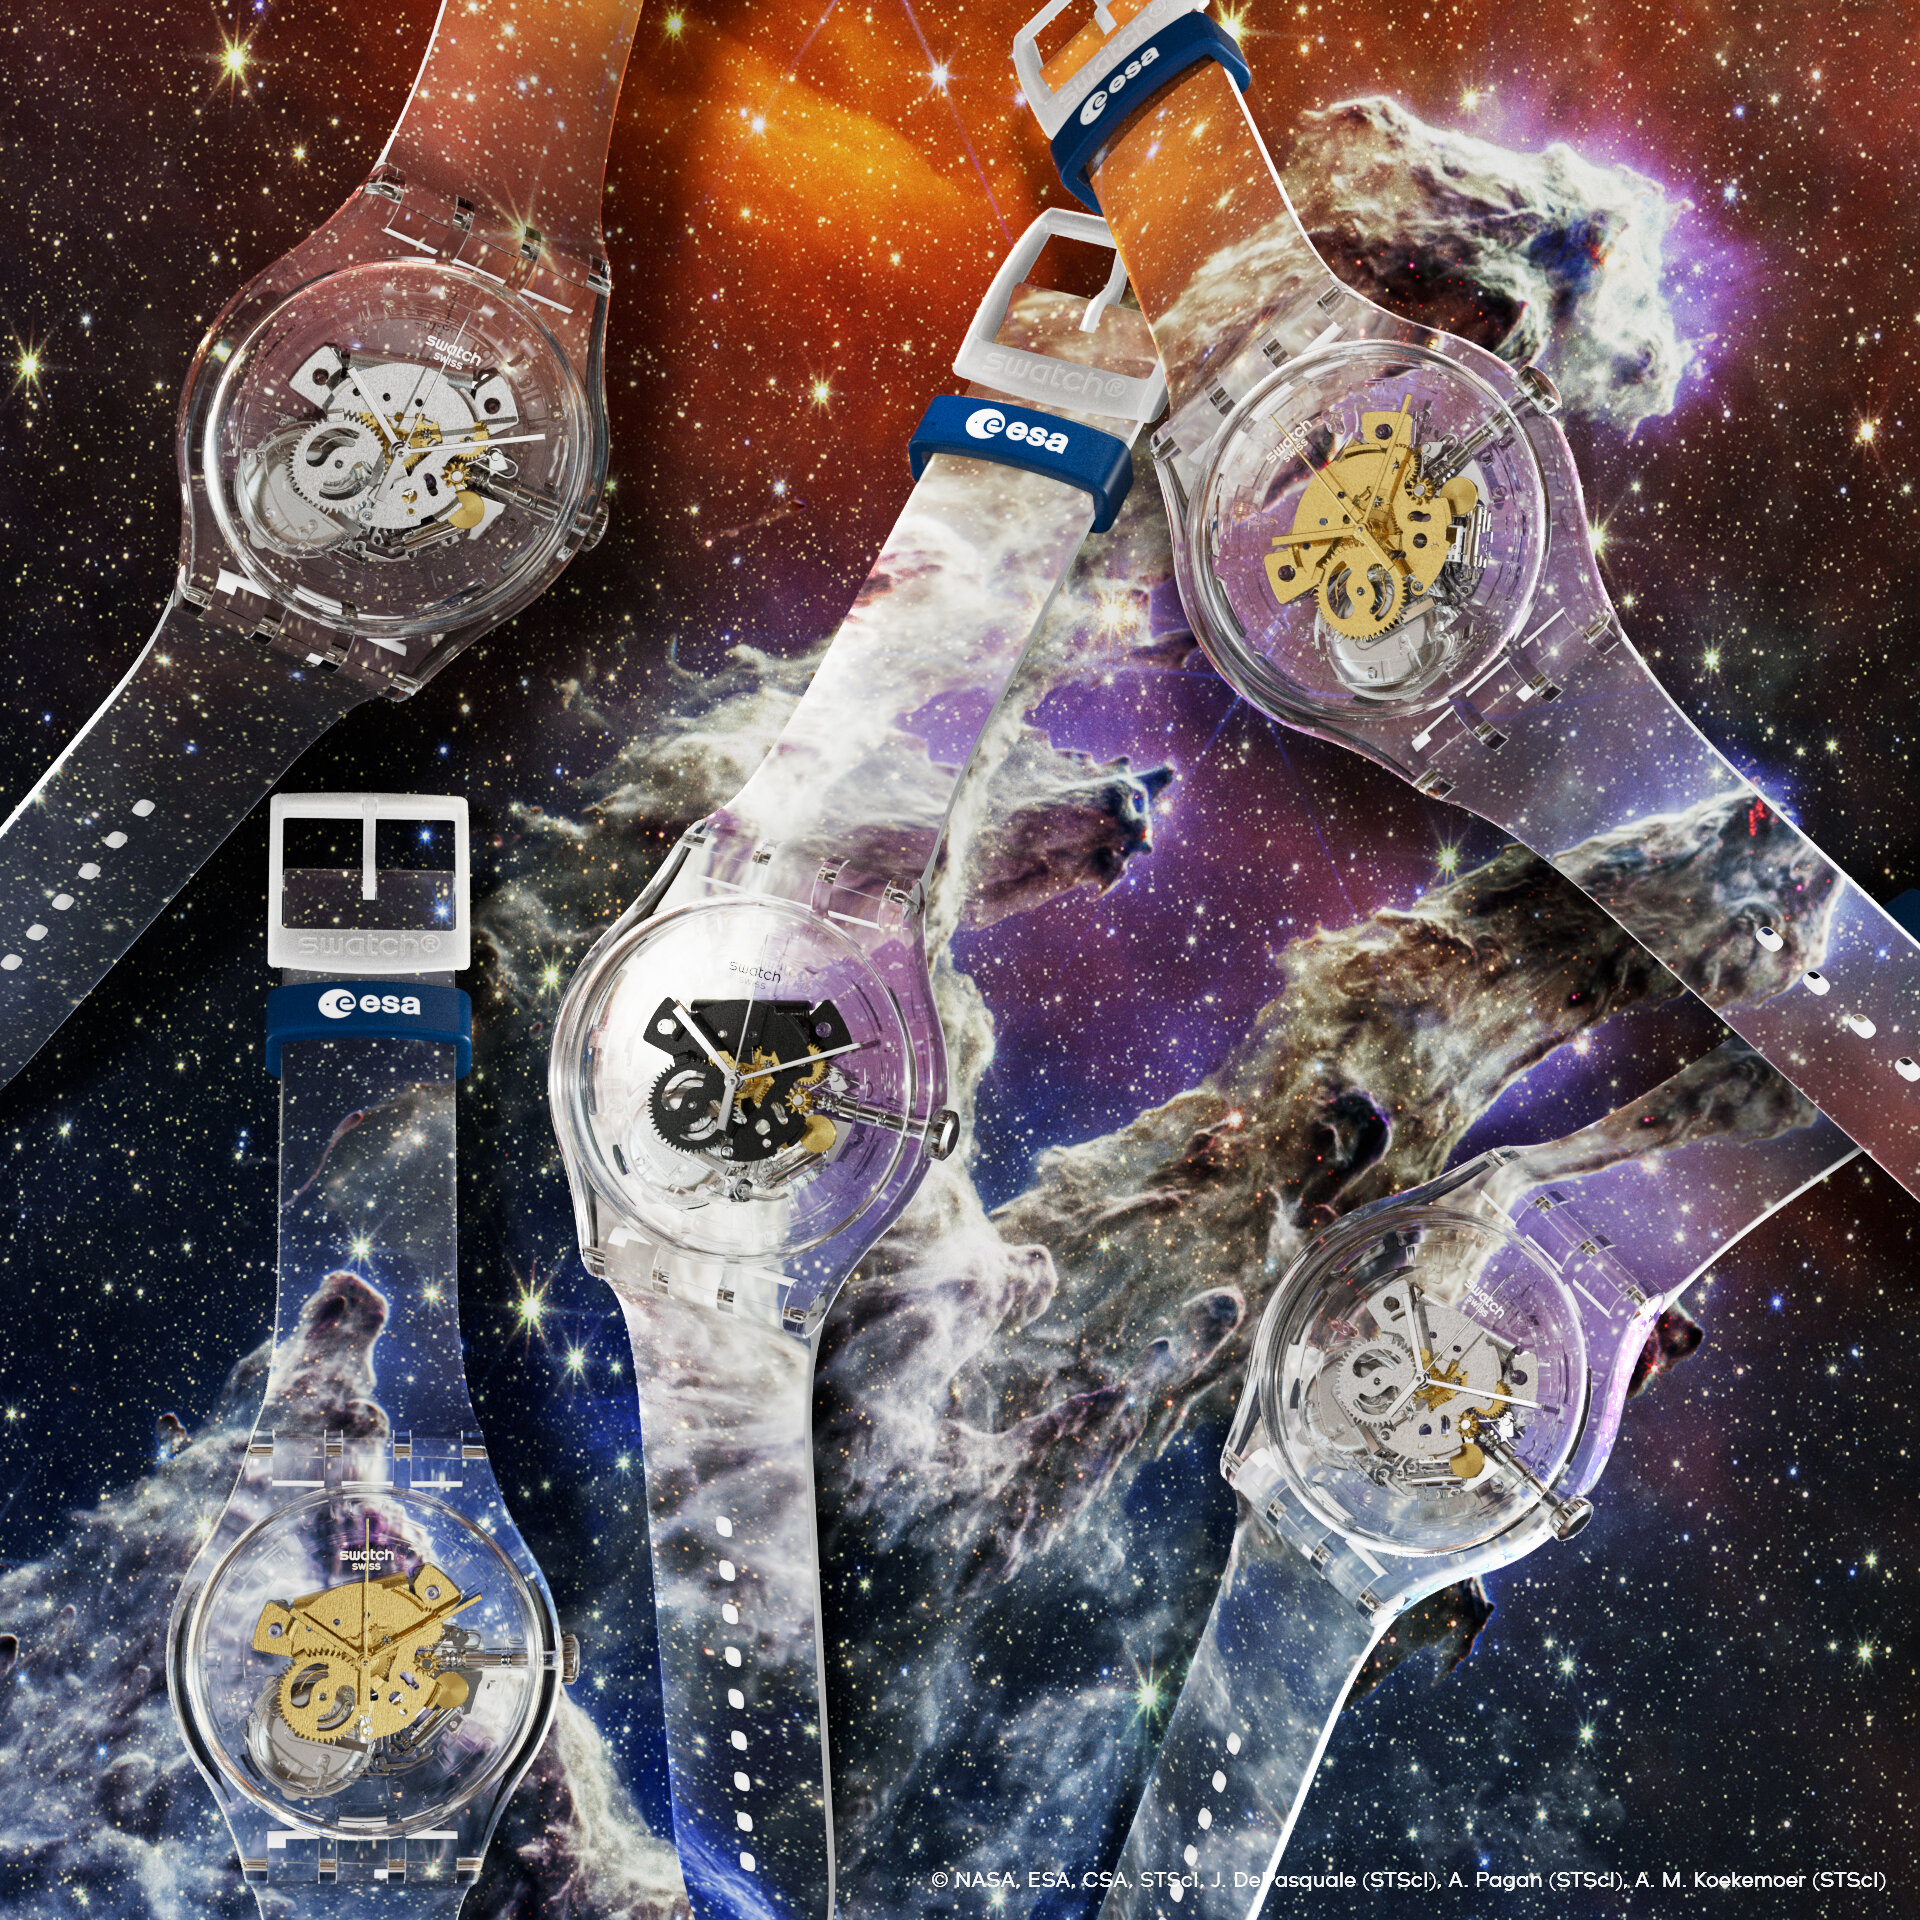 Watches from the ESA and Swatch X You collection